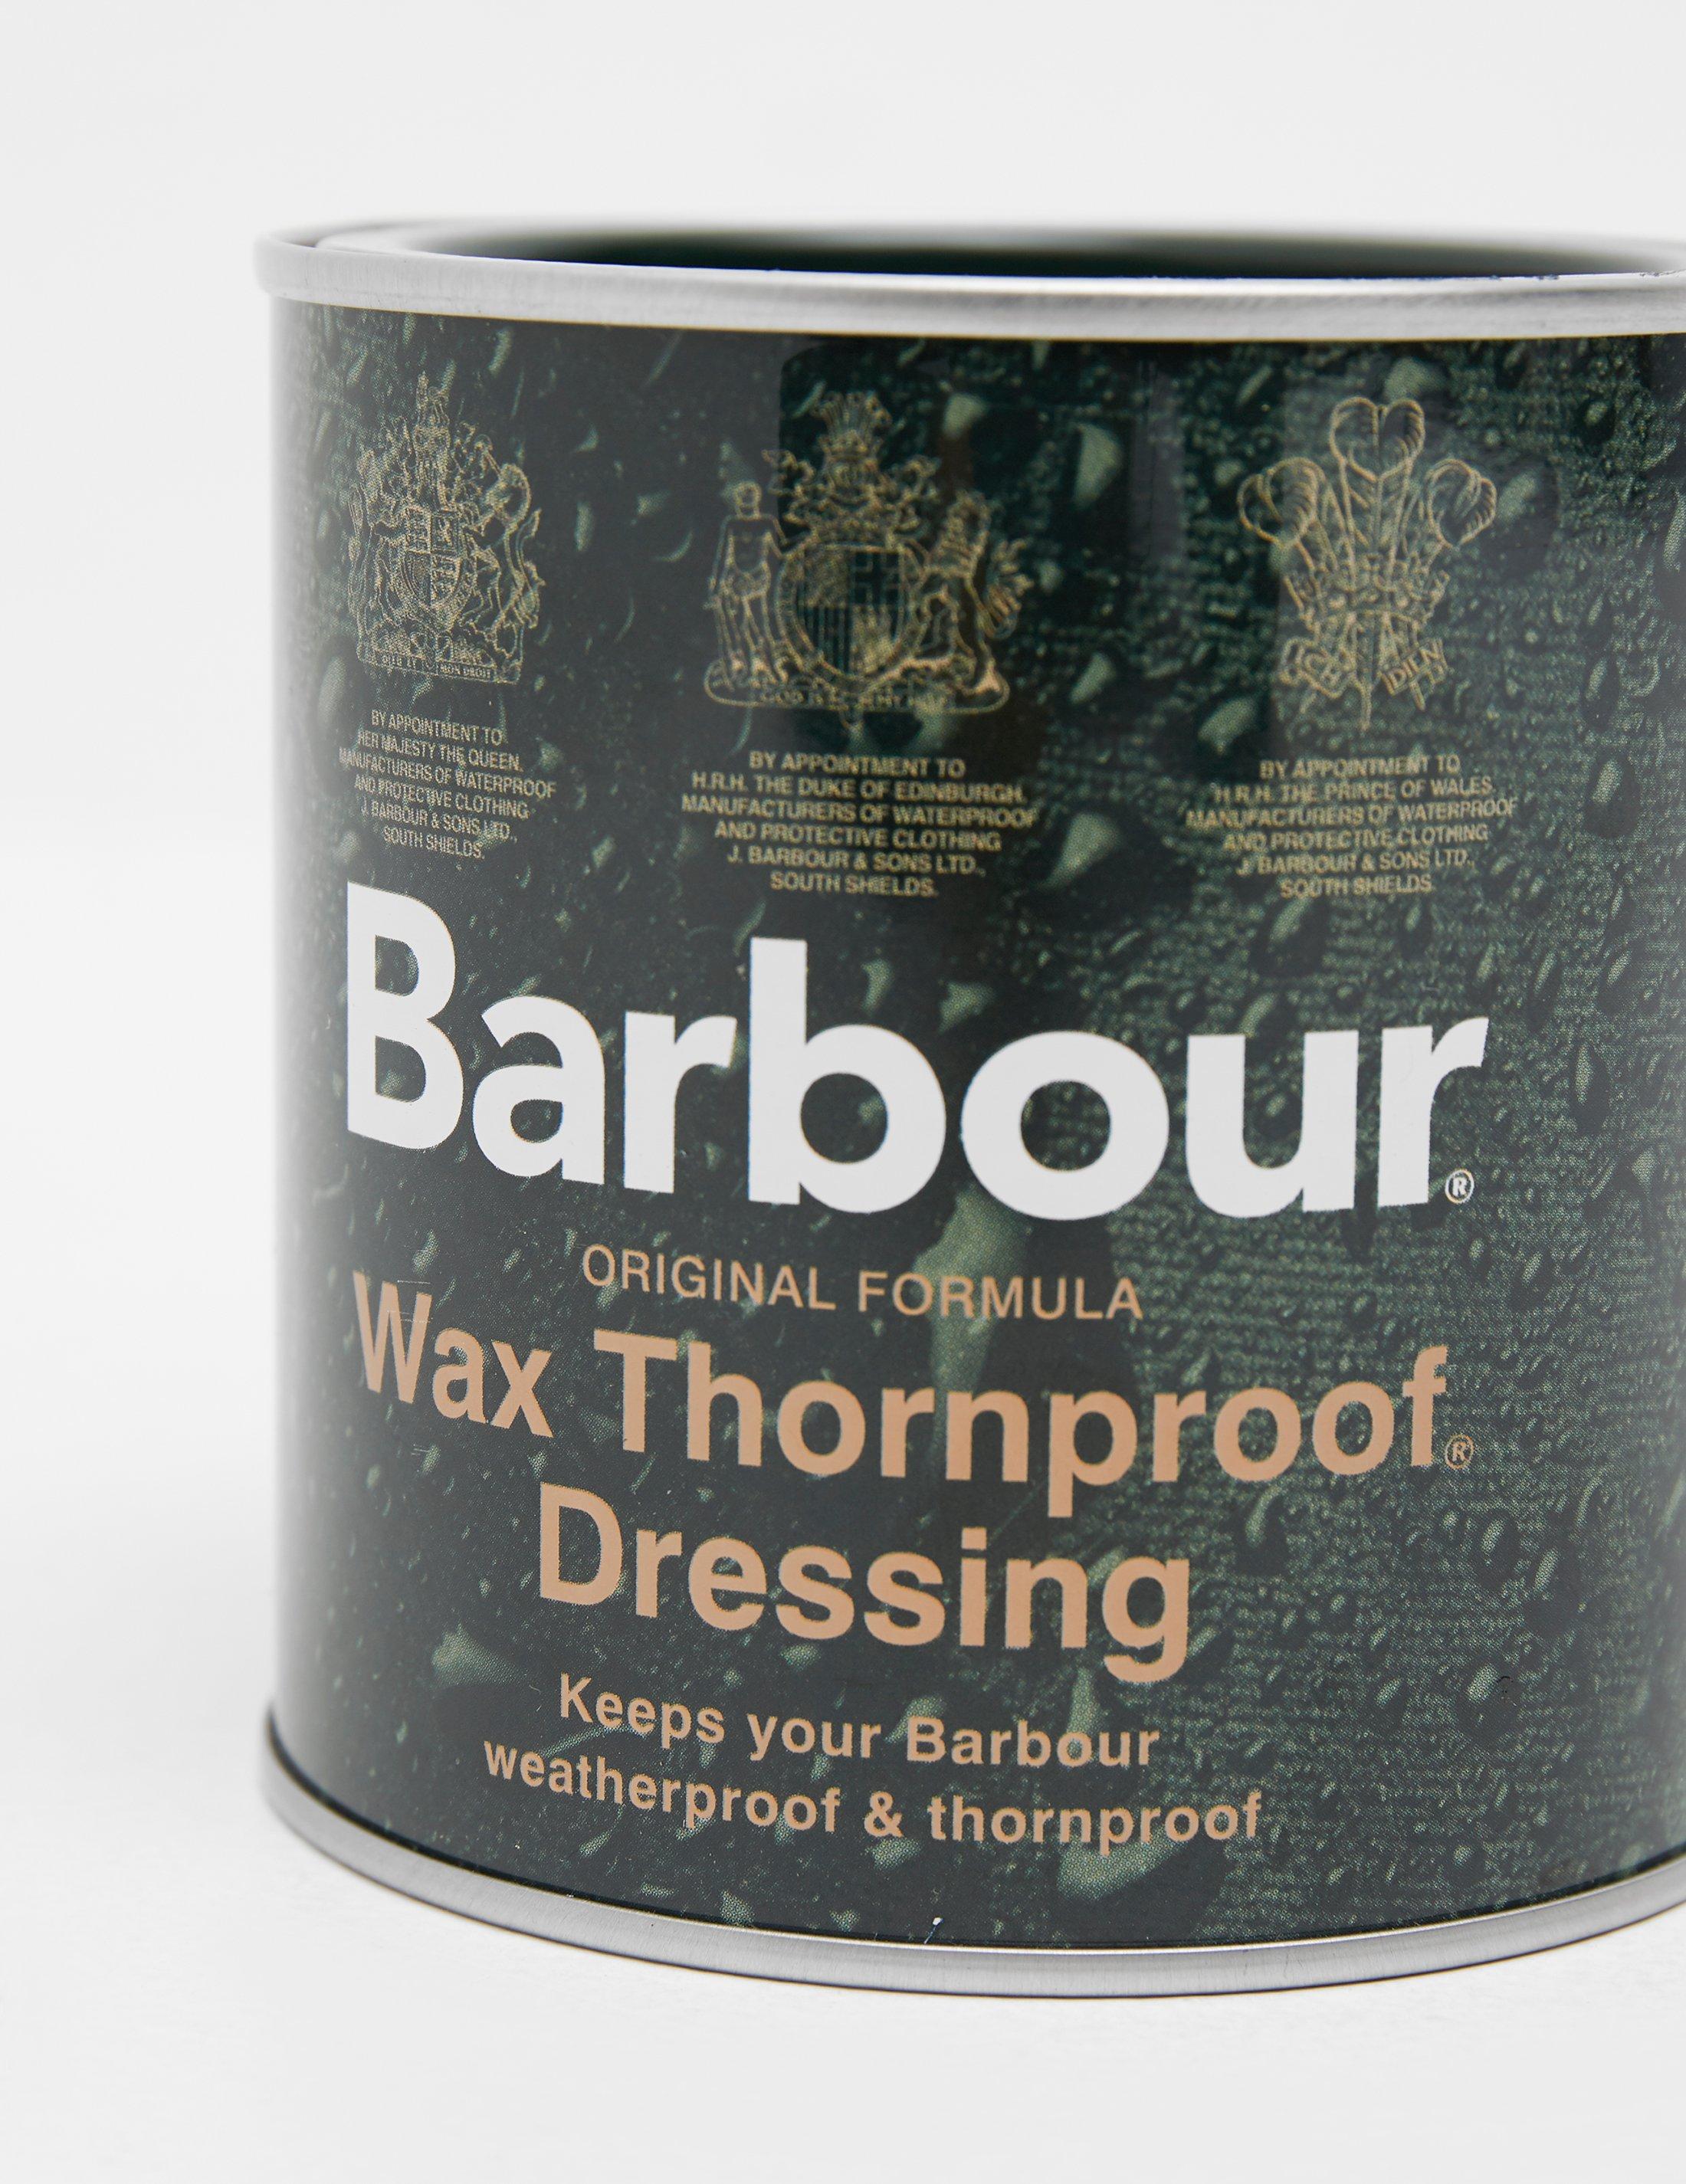 apply barbour wax thornproof dressing 